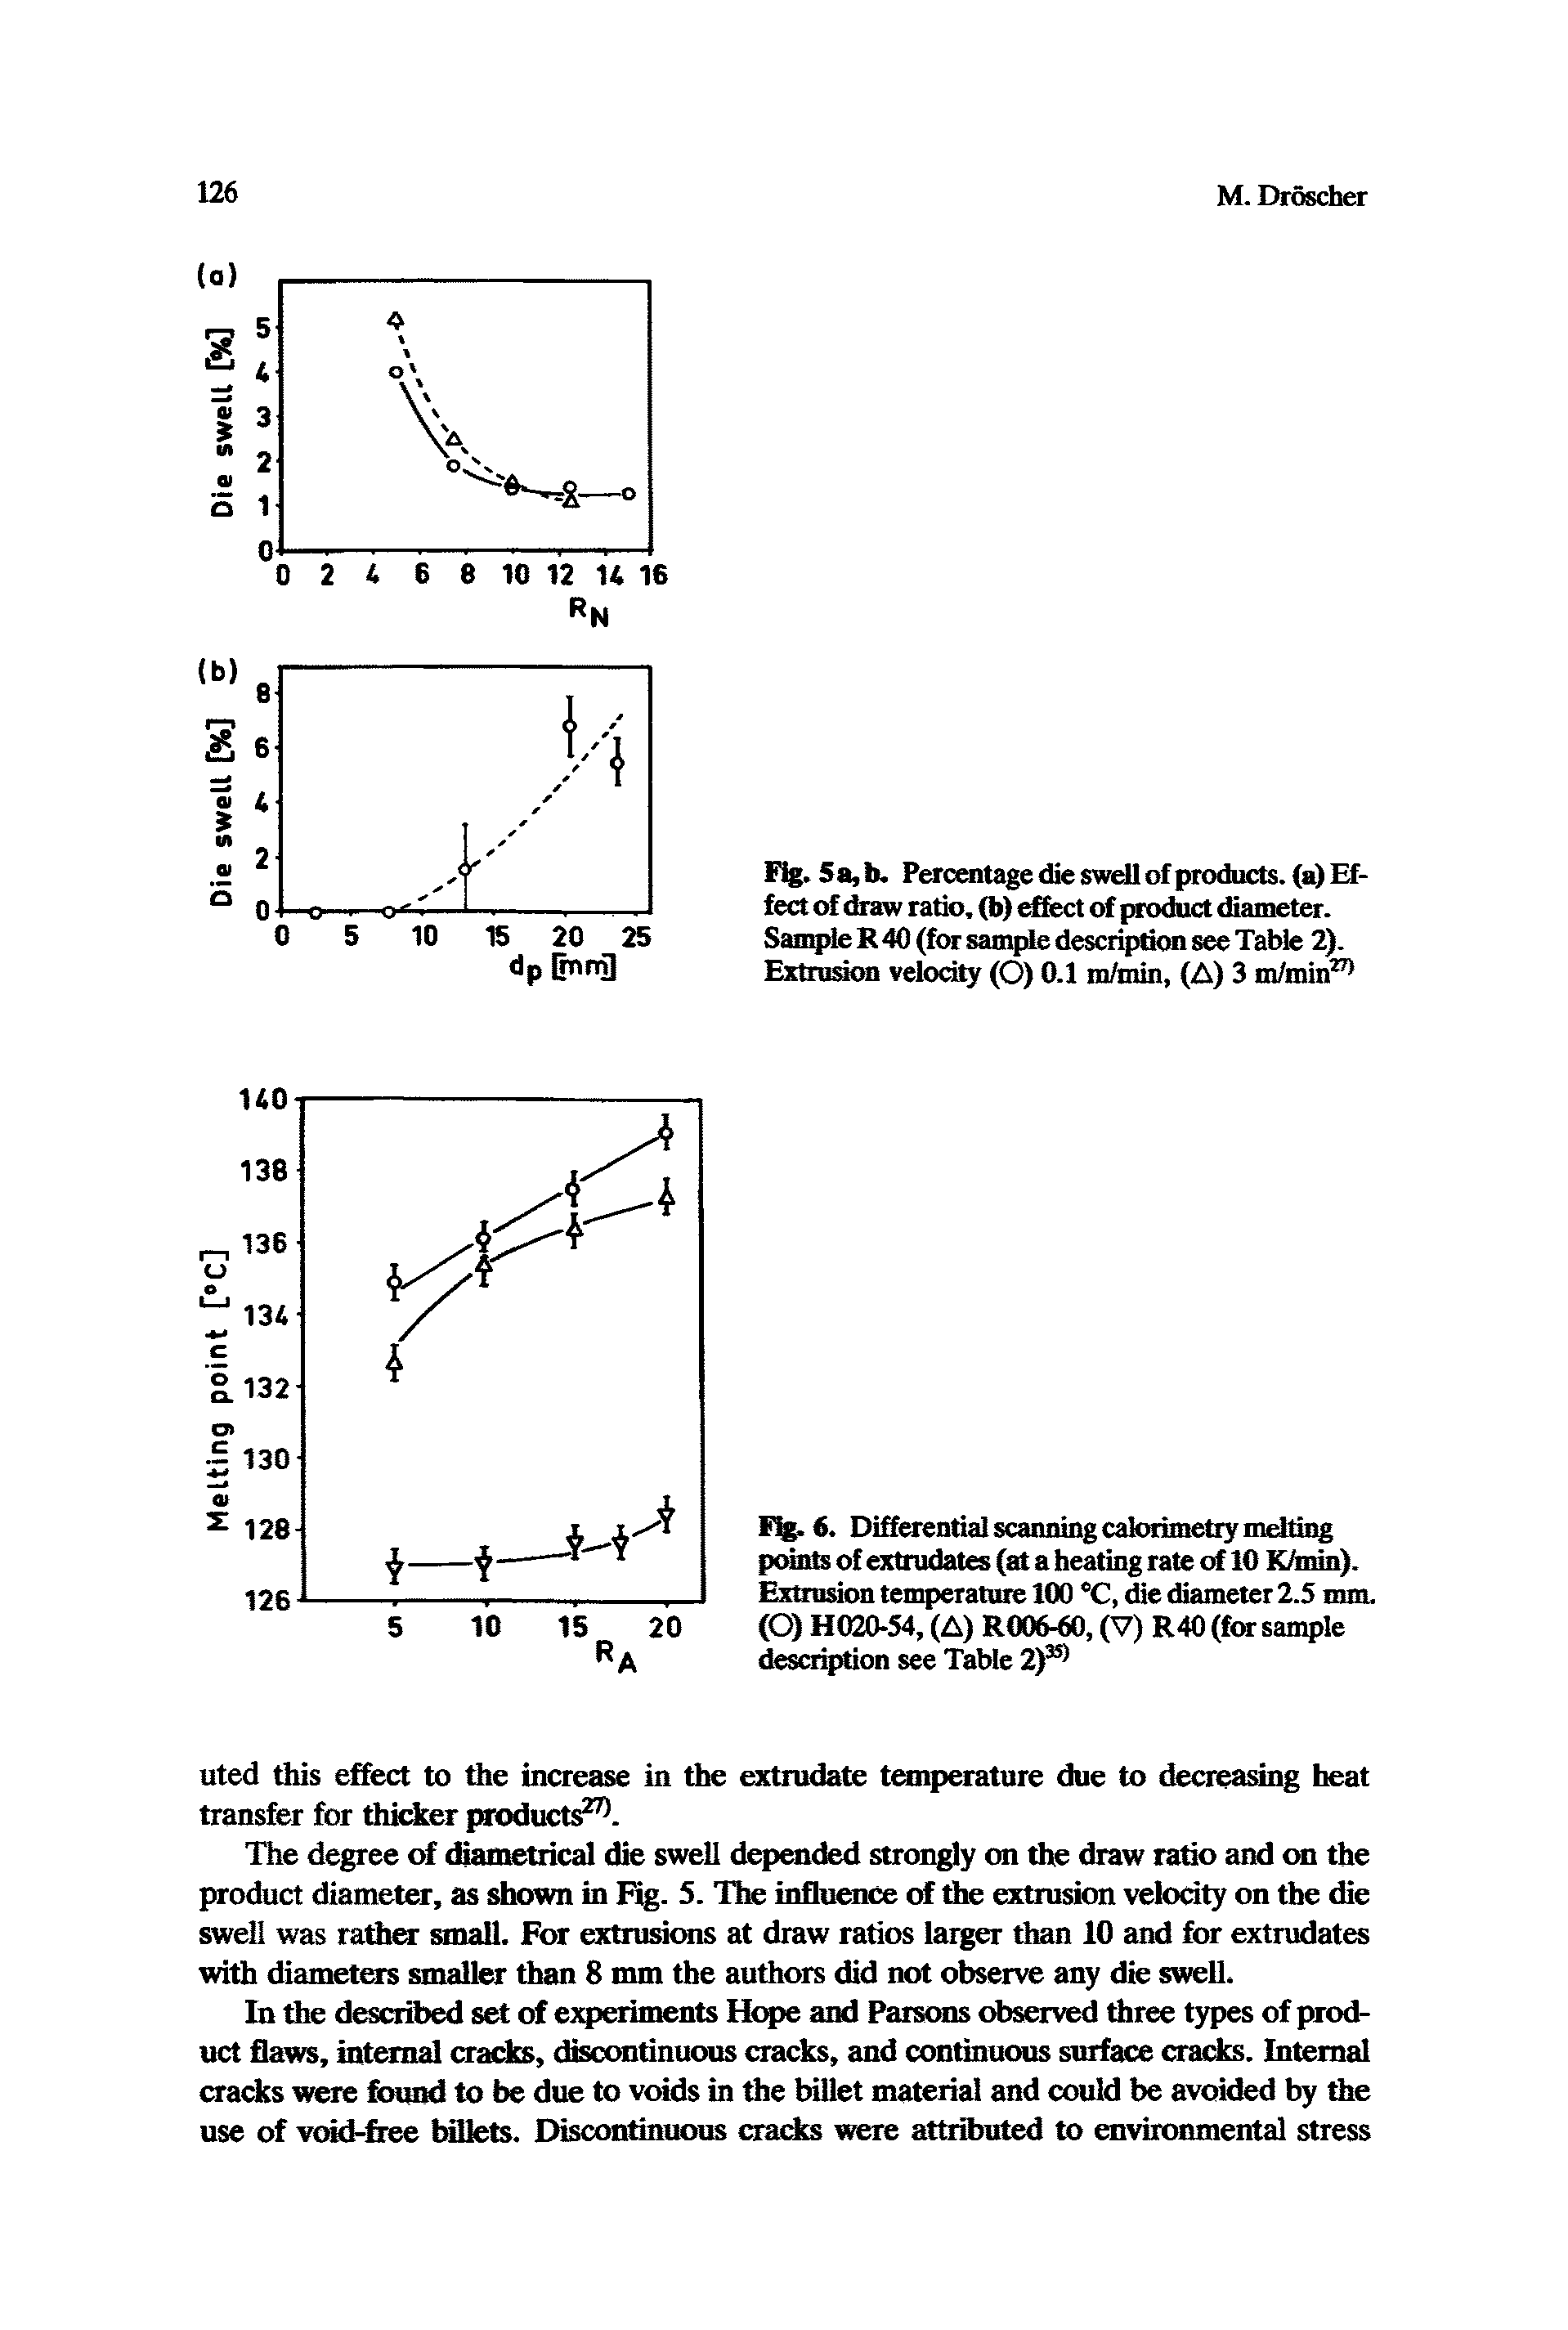 Fig. 6. Differential scanning calorimetry melting points of extrudates (at a heating rate of 10 K/min). Extrusion temperature 100 °C, die diameter 2.5 mm. (O) H020-54, (A) R006-60, (V) R40 (for sample description see Table 2)35)...